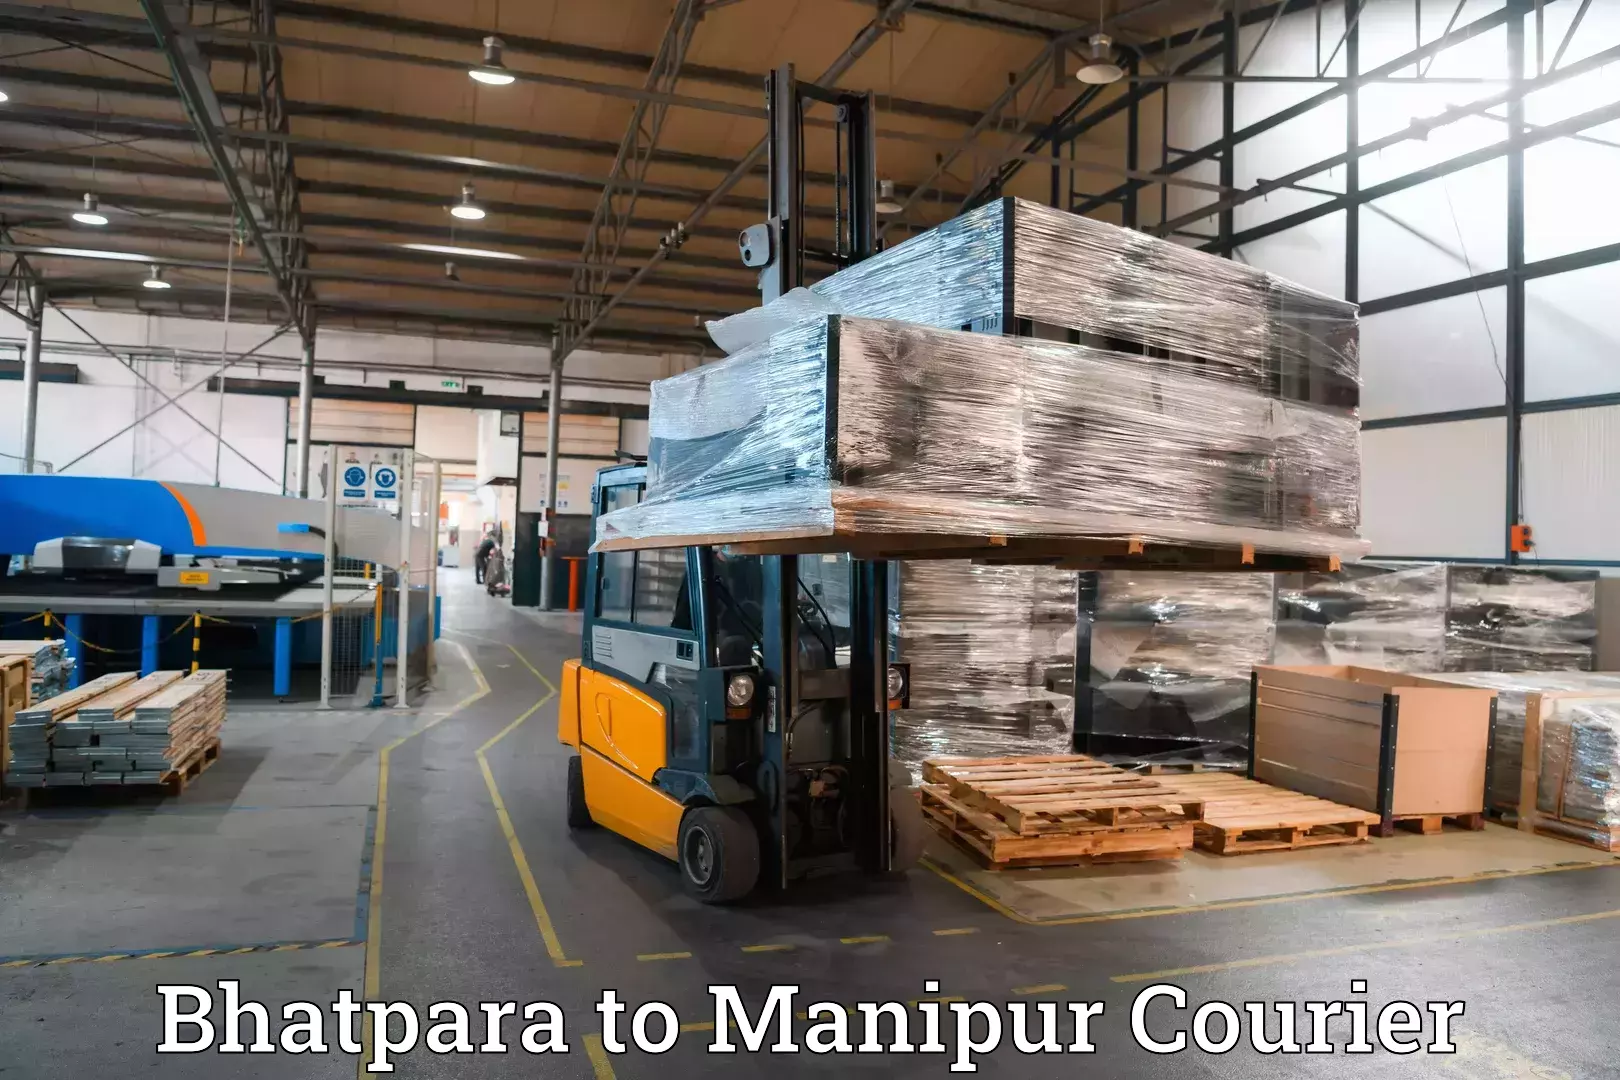 Luggage shipment specialists Bhatpara to Imphal